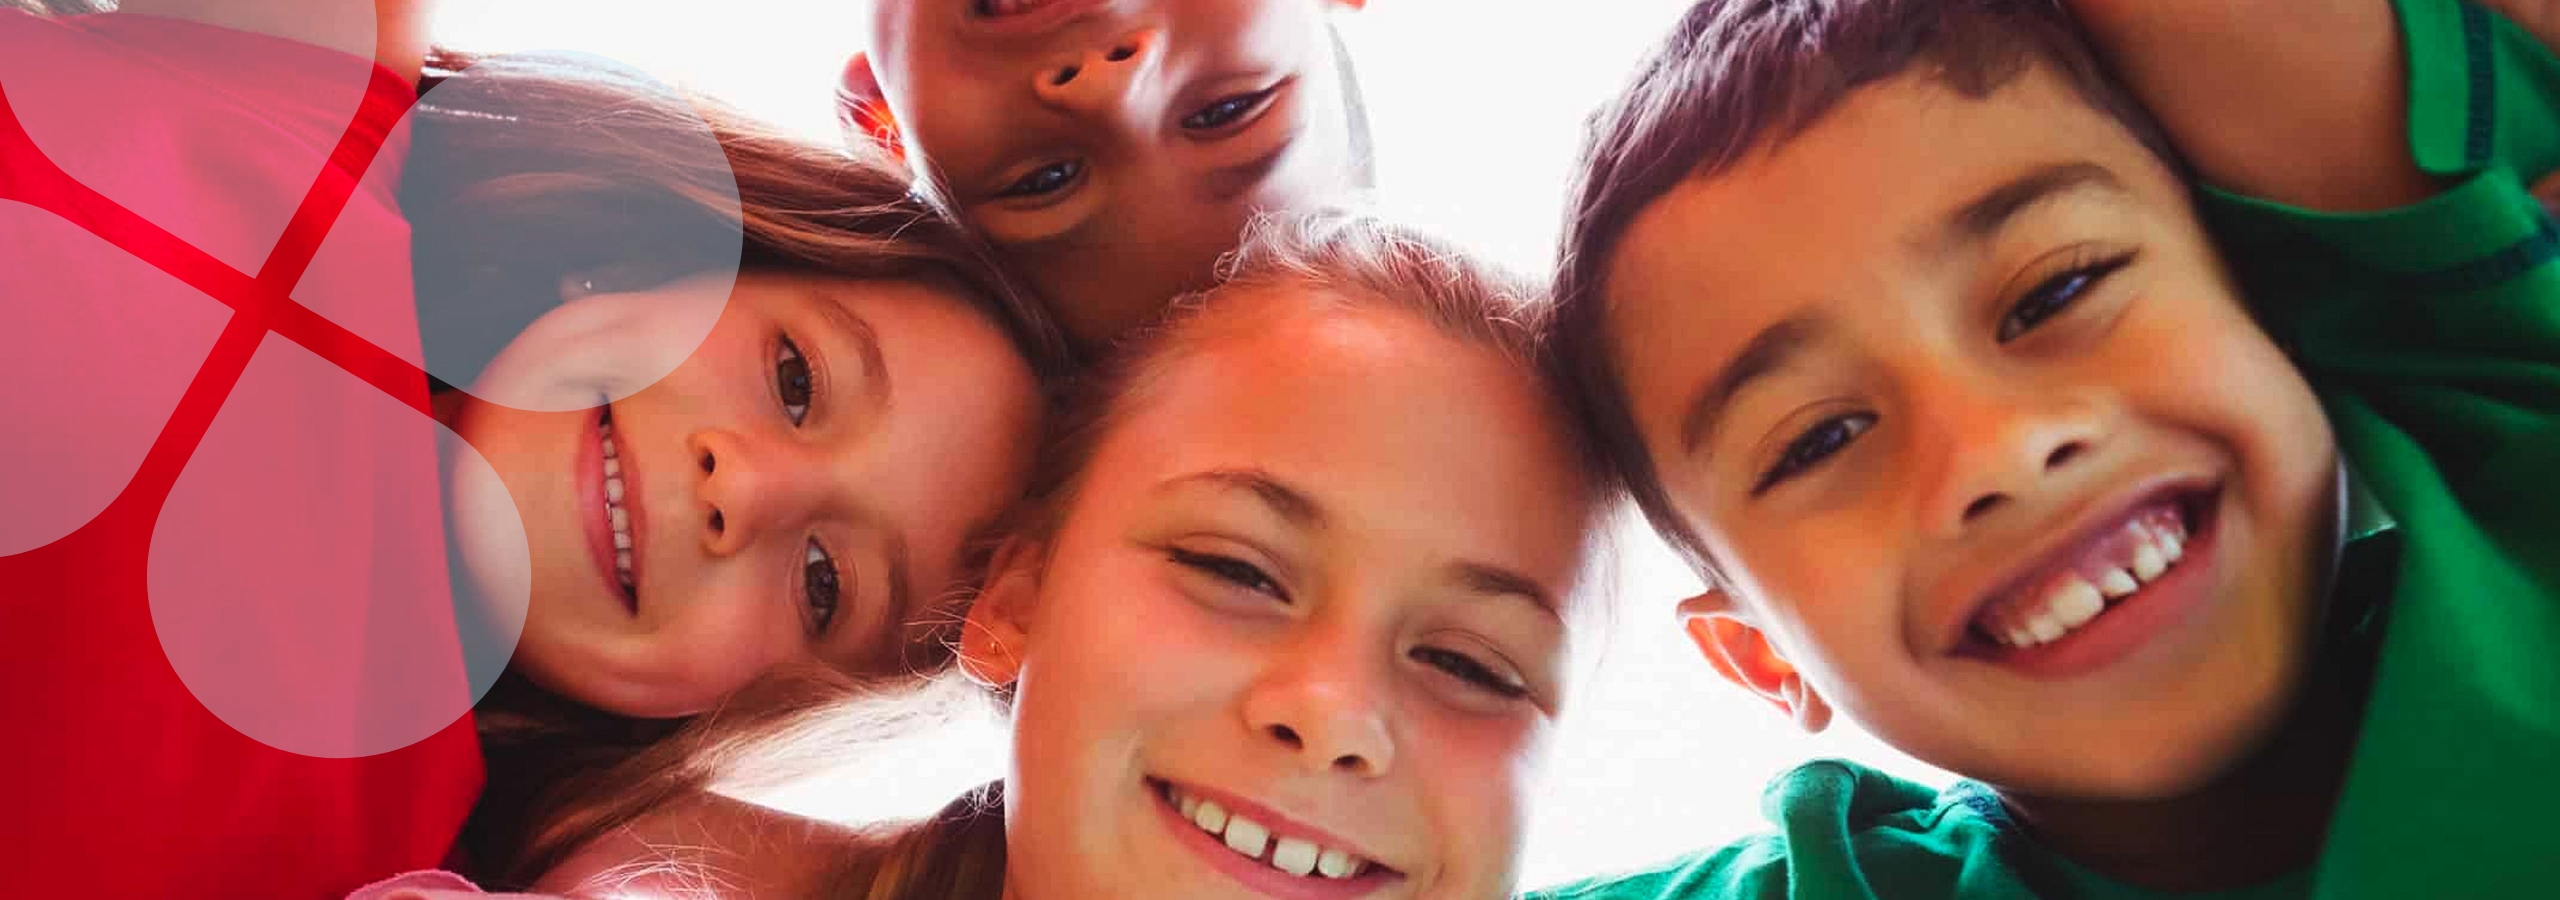 Children in a circle smiling down at the camera